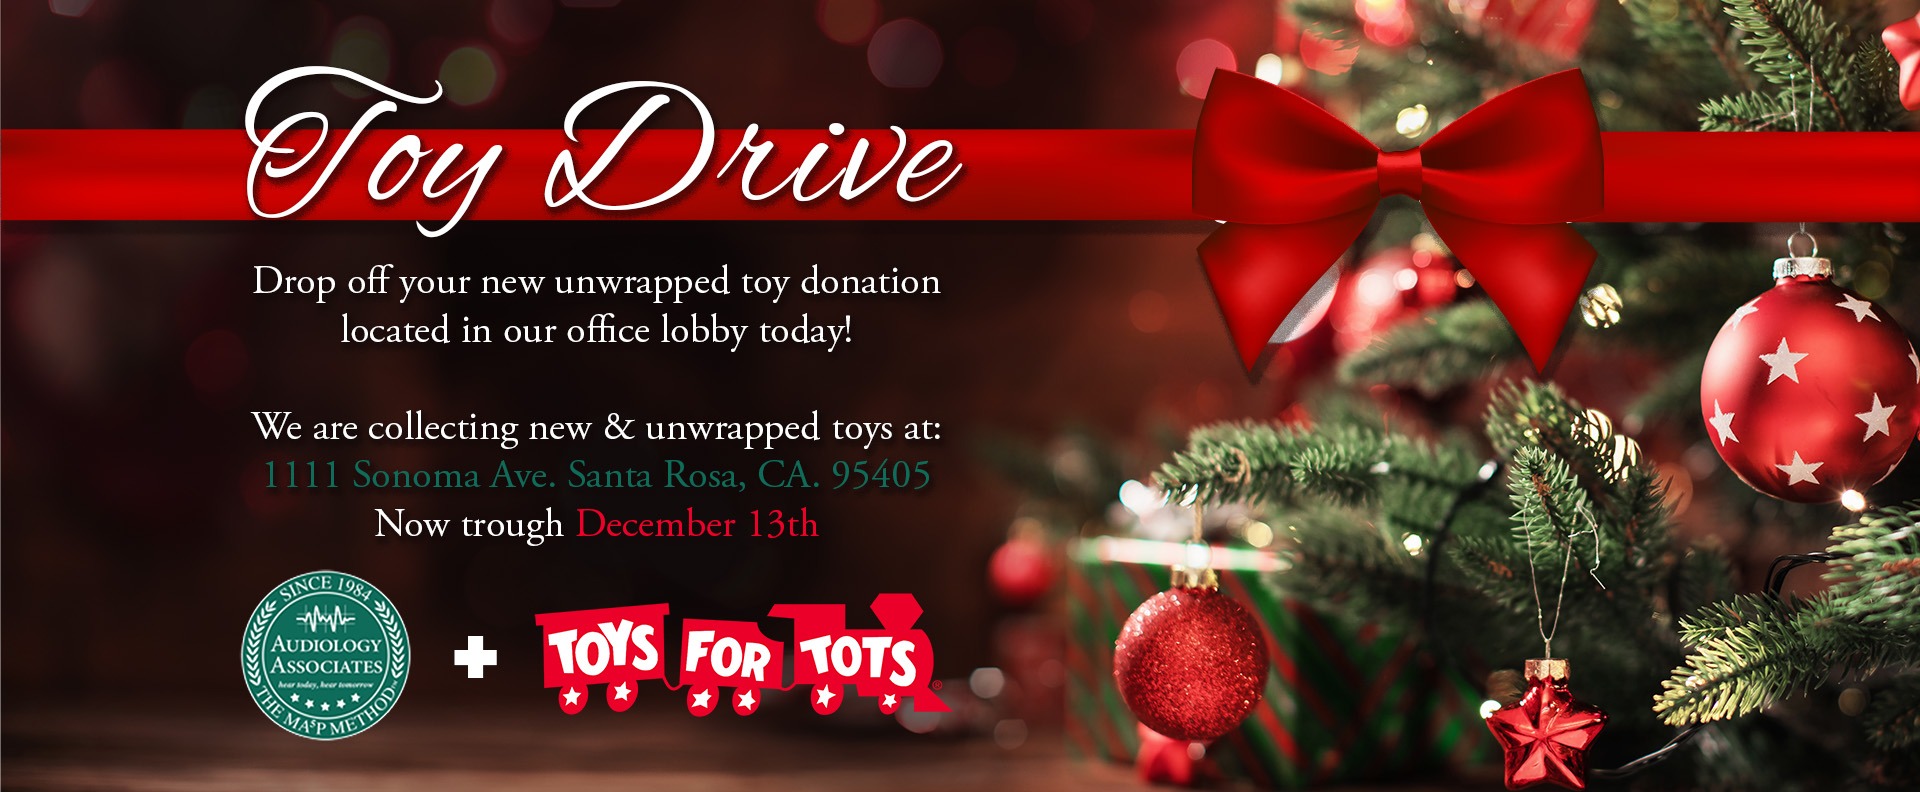 Toy Drive at Audiology Associates 